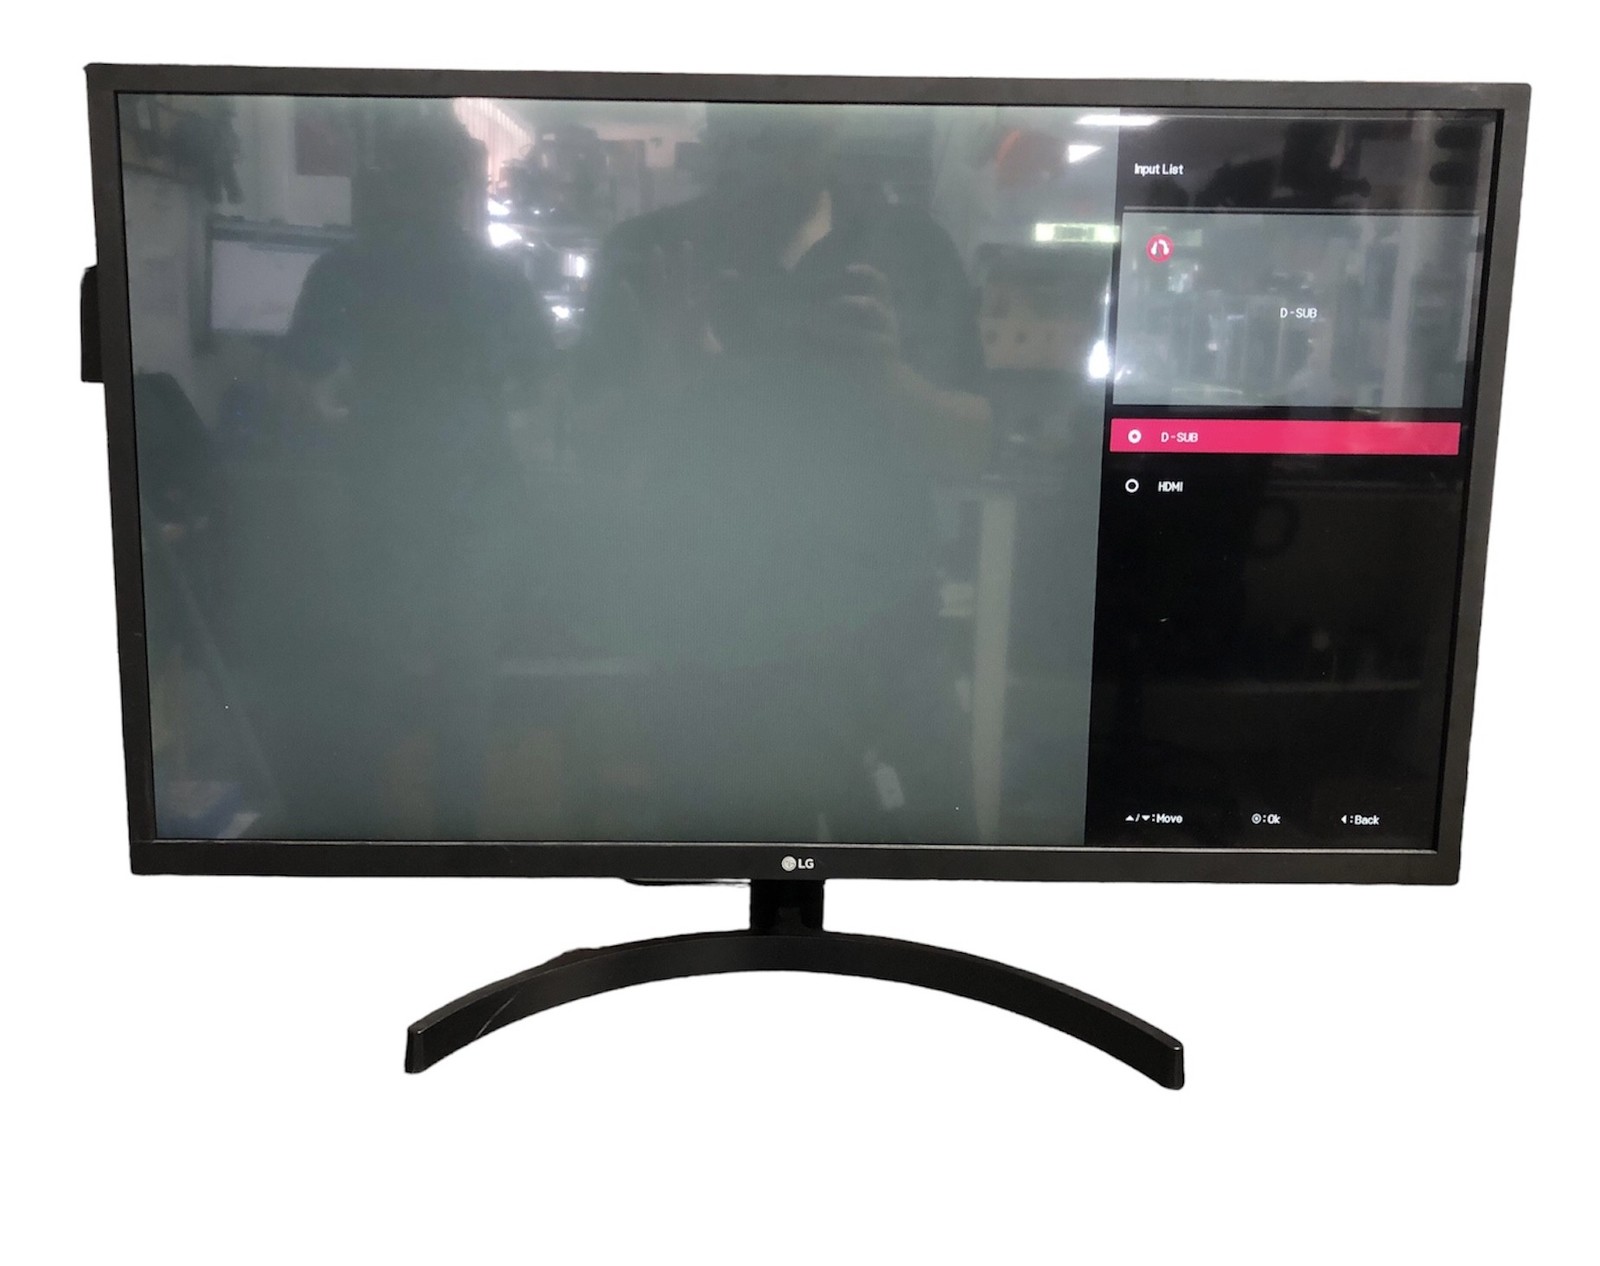 Primary image for Lg Monitor 32mn50w 382564